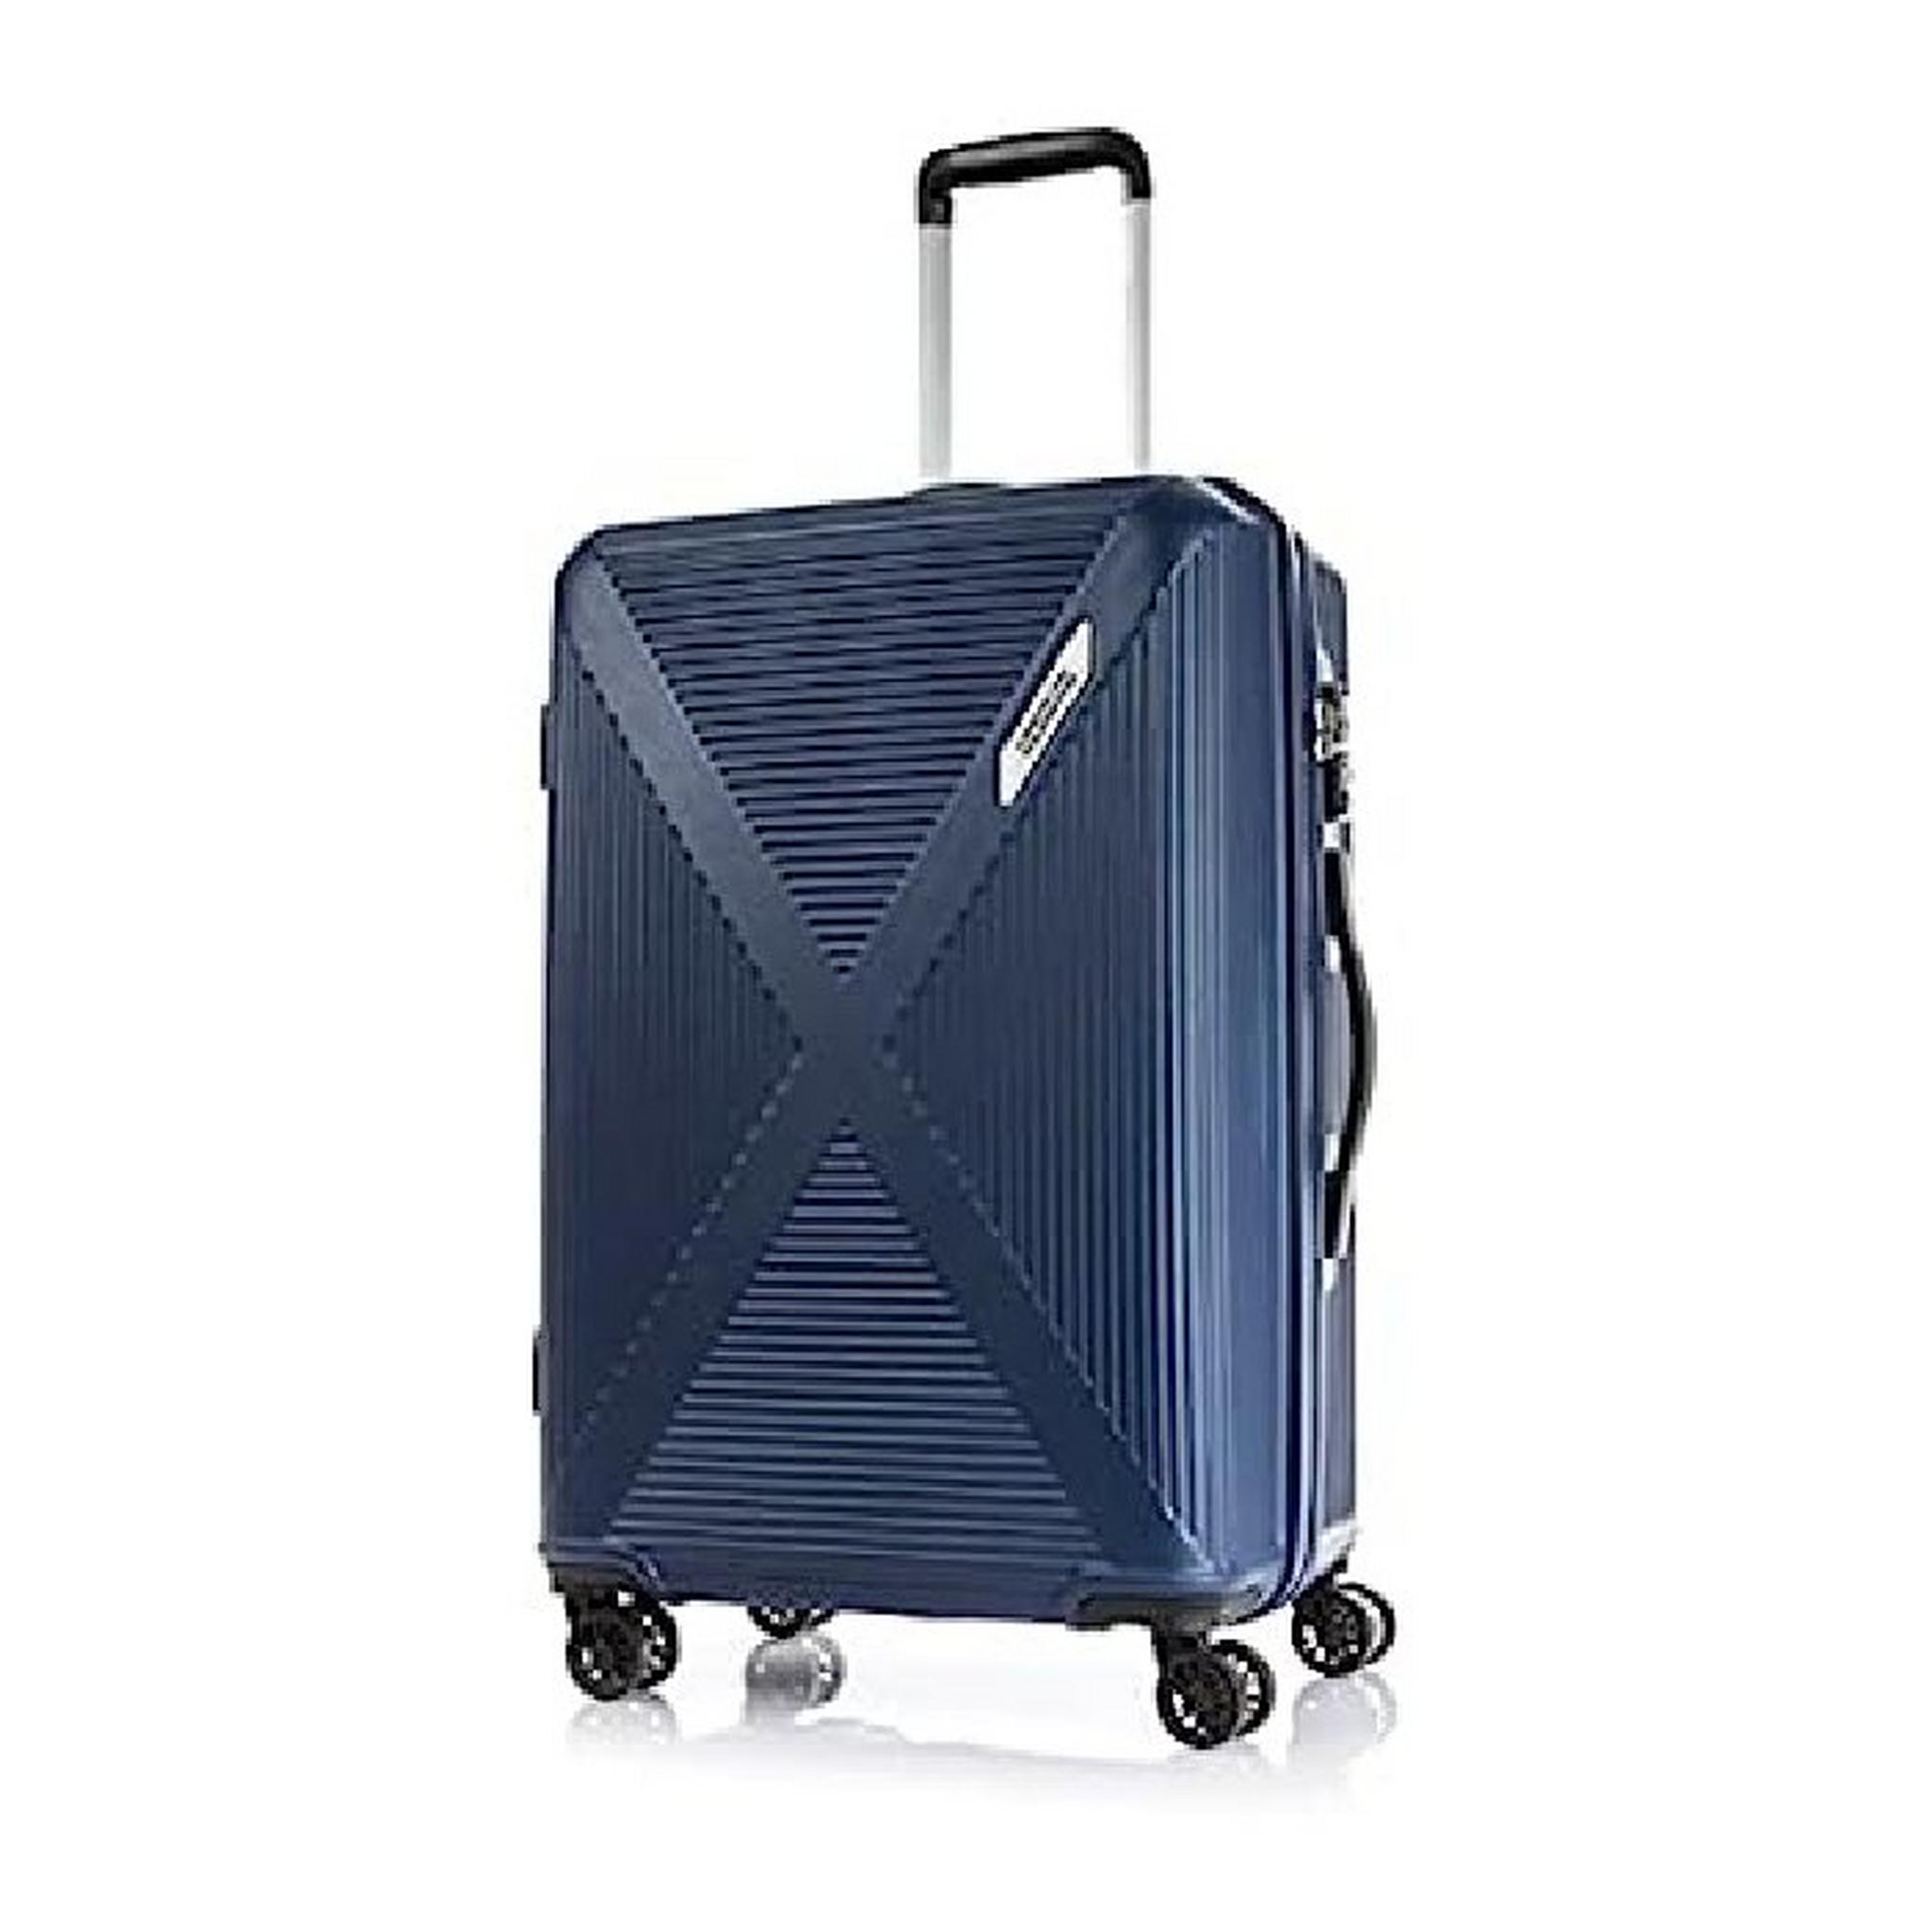 American Tourister Cuatro Hard Luggage with Spinner Wheels, 69 cm, HN1X41002– Navy Blue